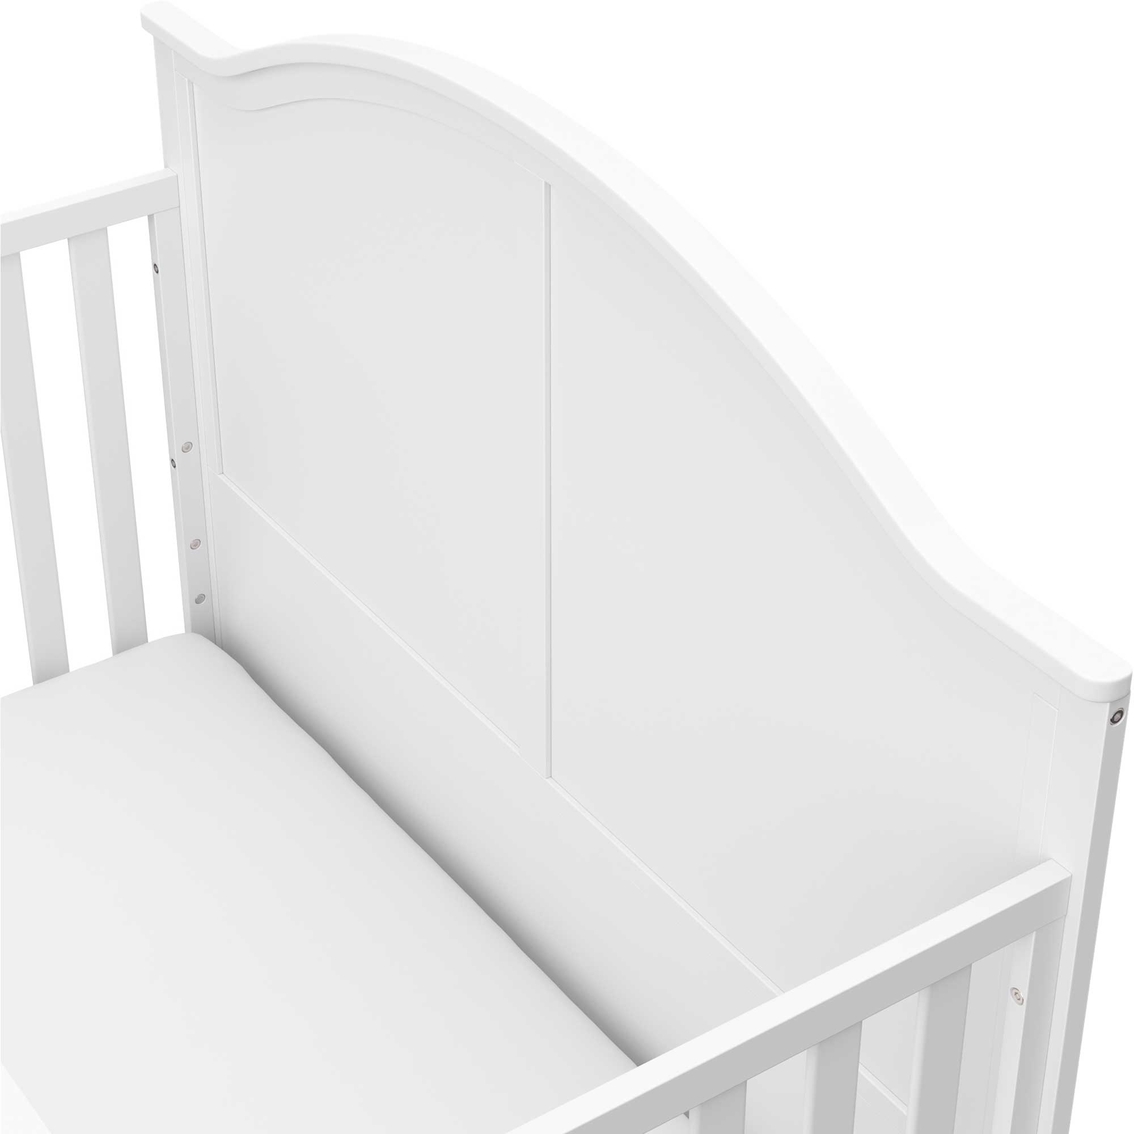 Graco Wilfred 5 in 1 Convertible Crib - Image 7 of 7